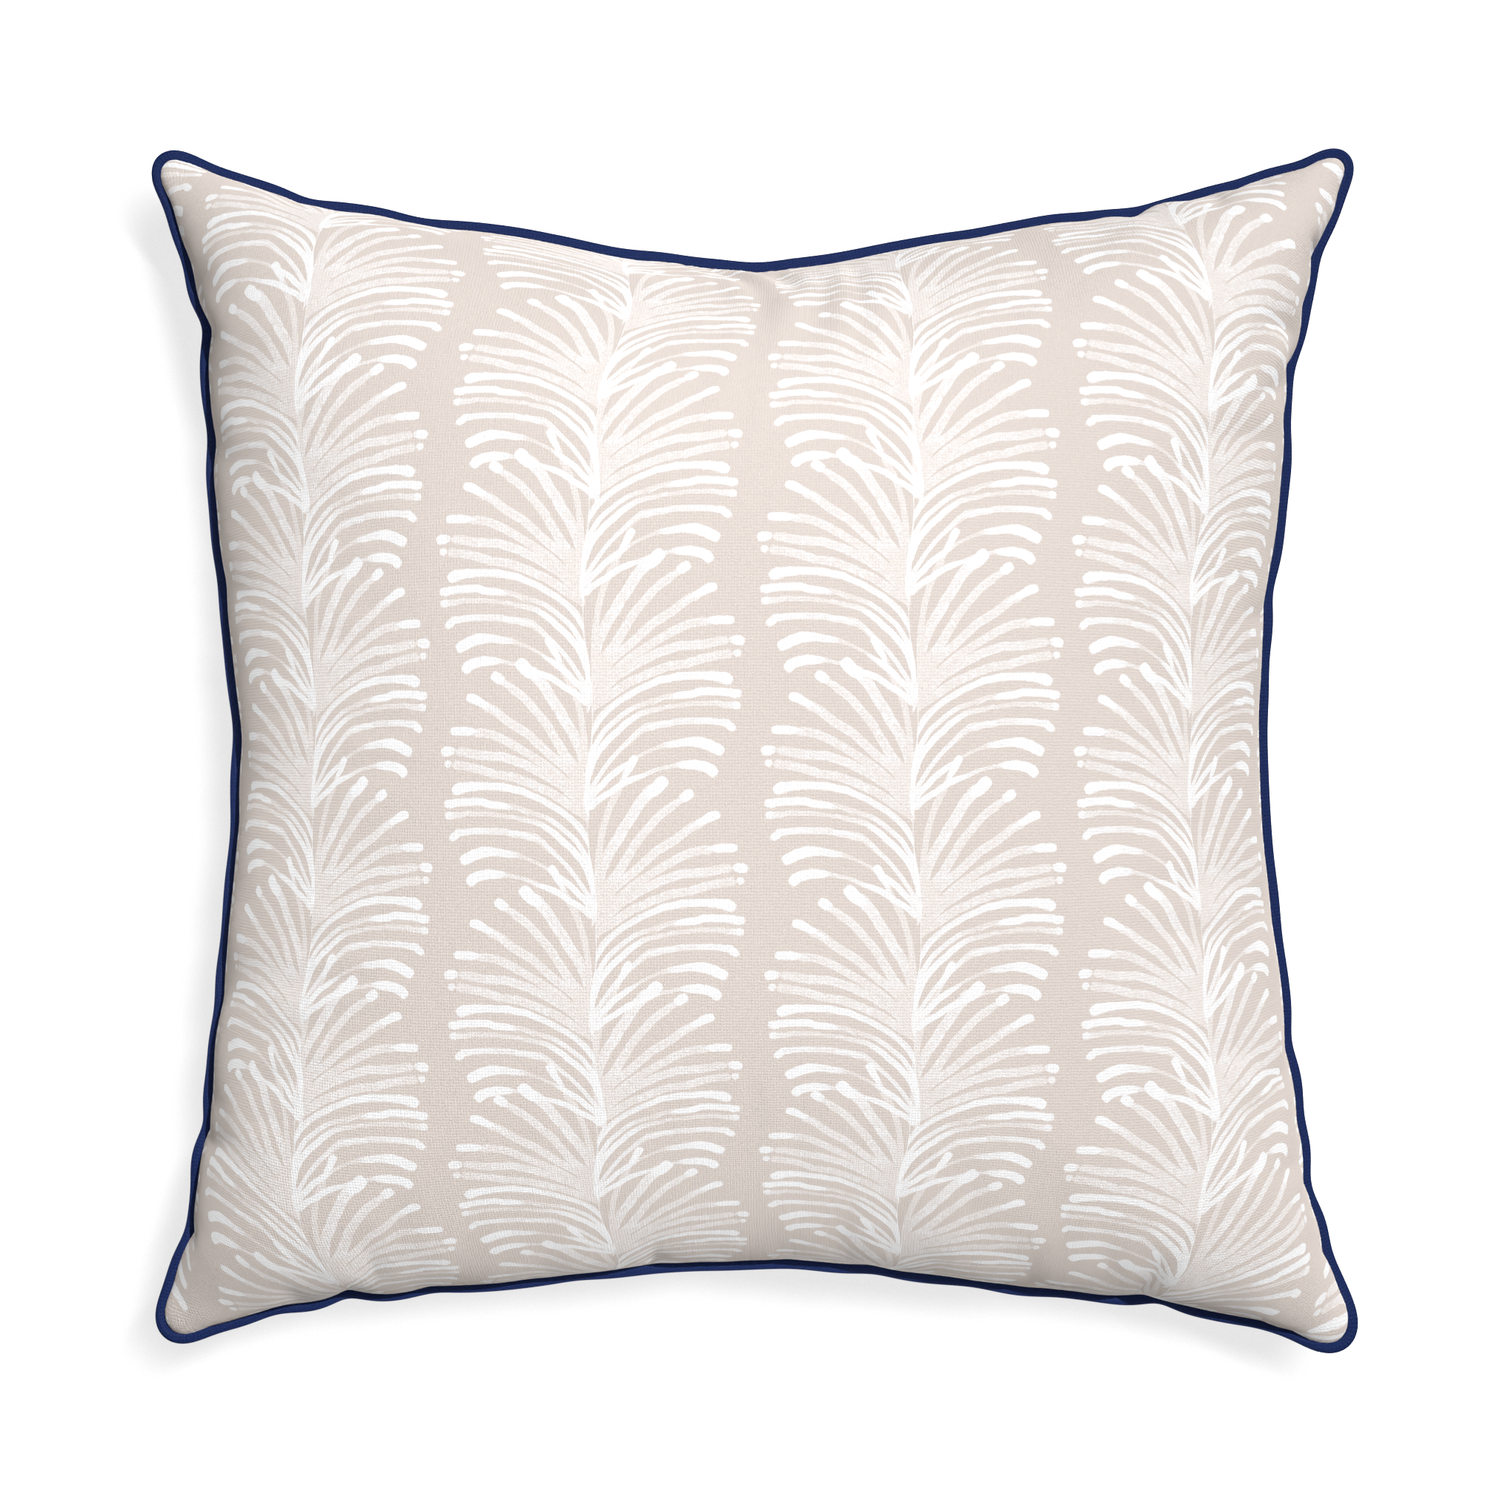 Euro-sham emma sand custom sand colored botanical stripepillow with midnight piping on white background